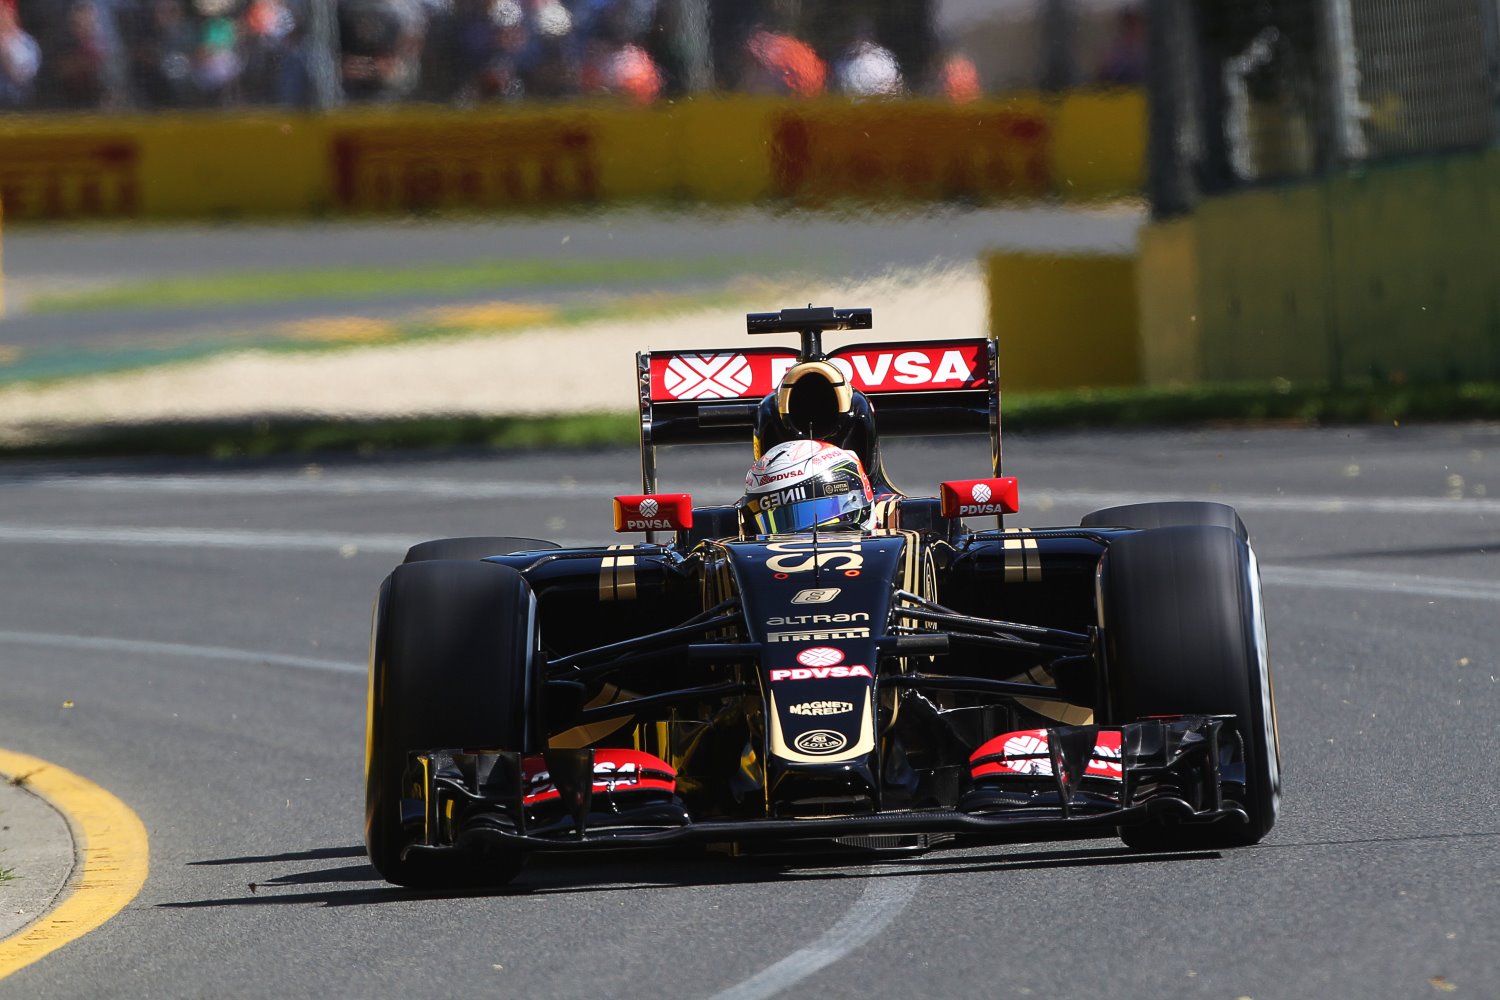 Grosjean says the Lotus is much better now that it has Mercedes power and is rid of the 'lemon' Renault engines